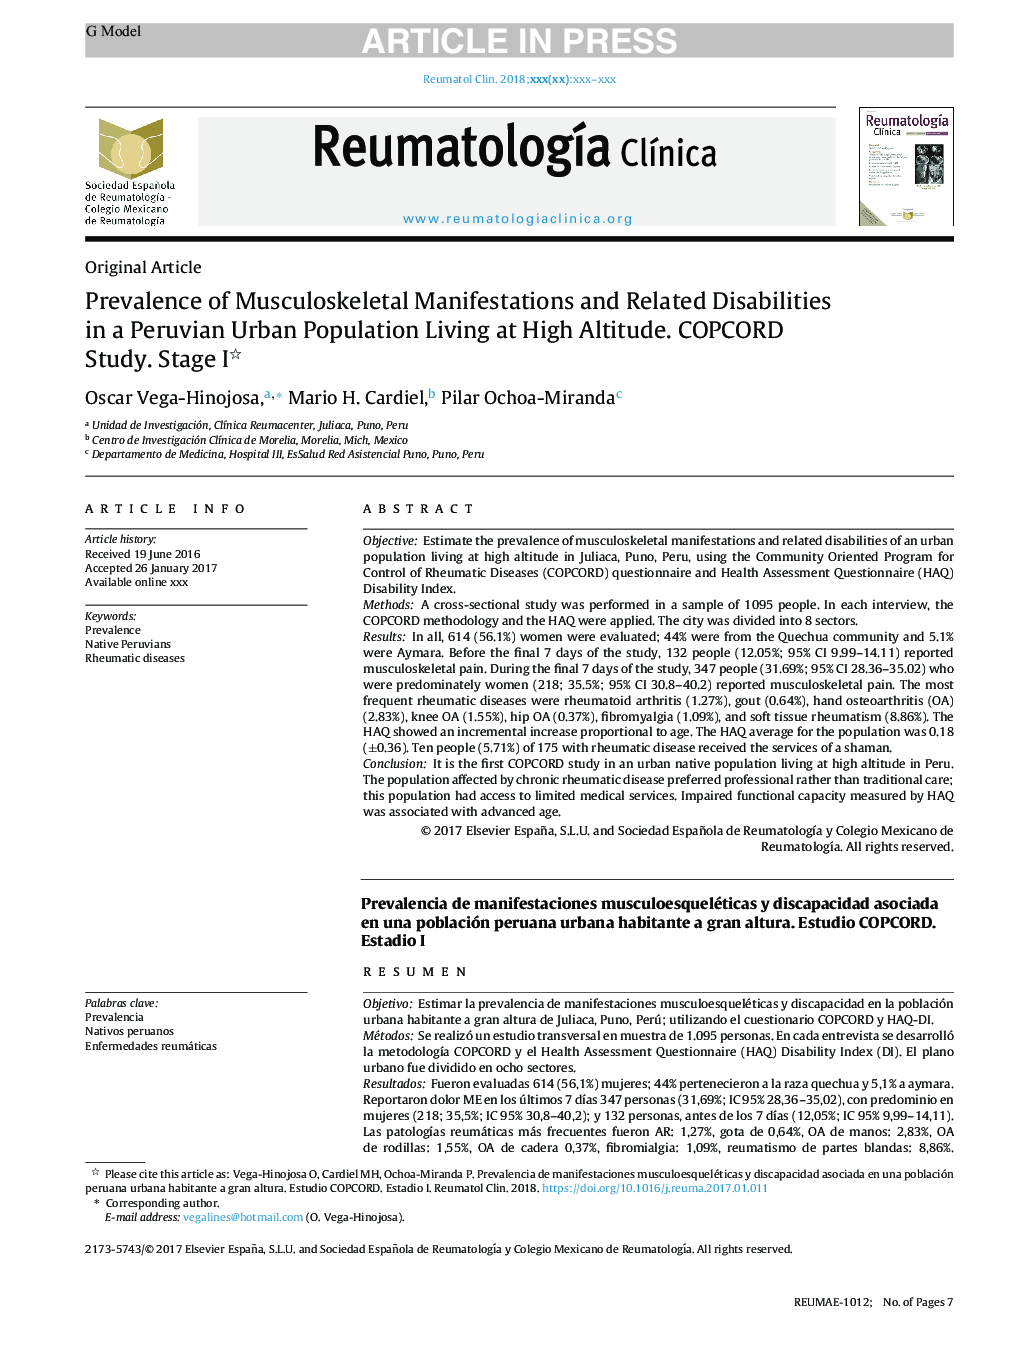 Prevalence of Musculoskeletal Manifestations and Related Disabilities in a Peruvian Urban Population Living at High Altitude. COPCORD Study. Stage I